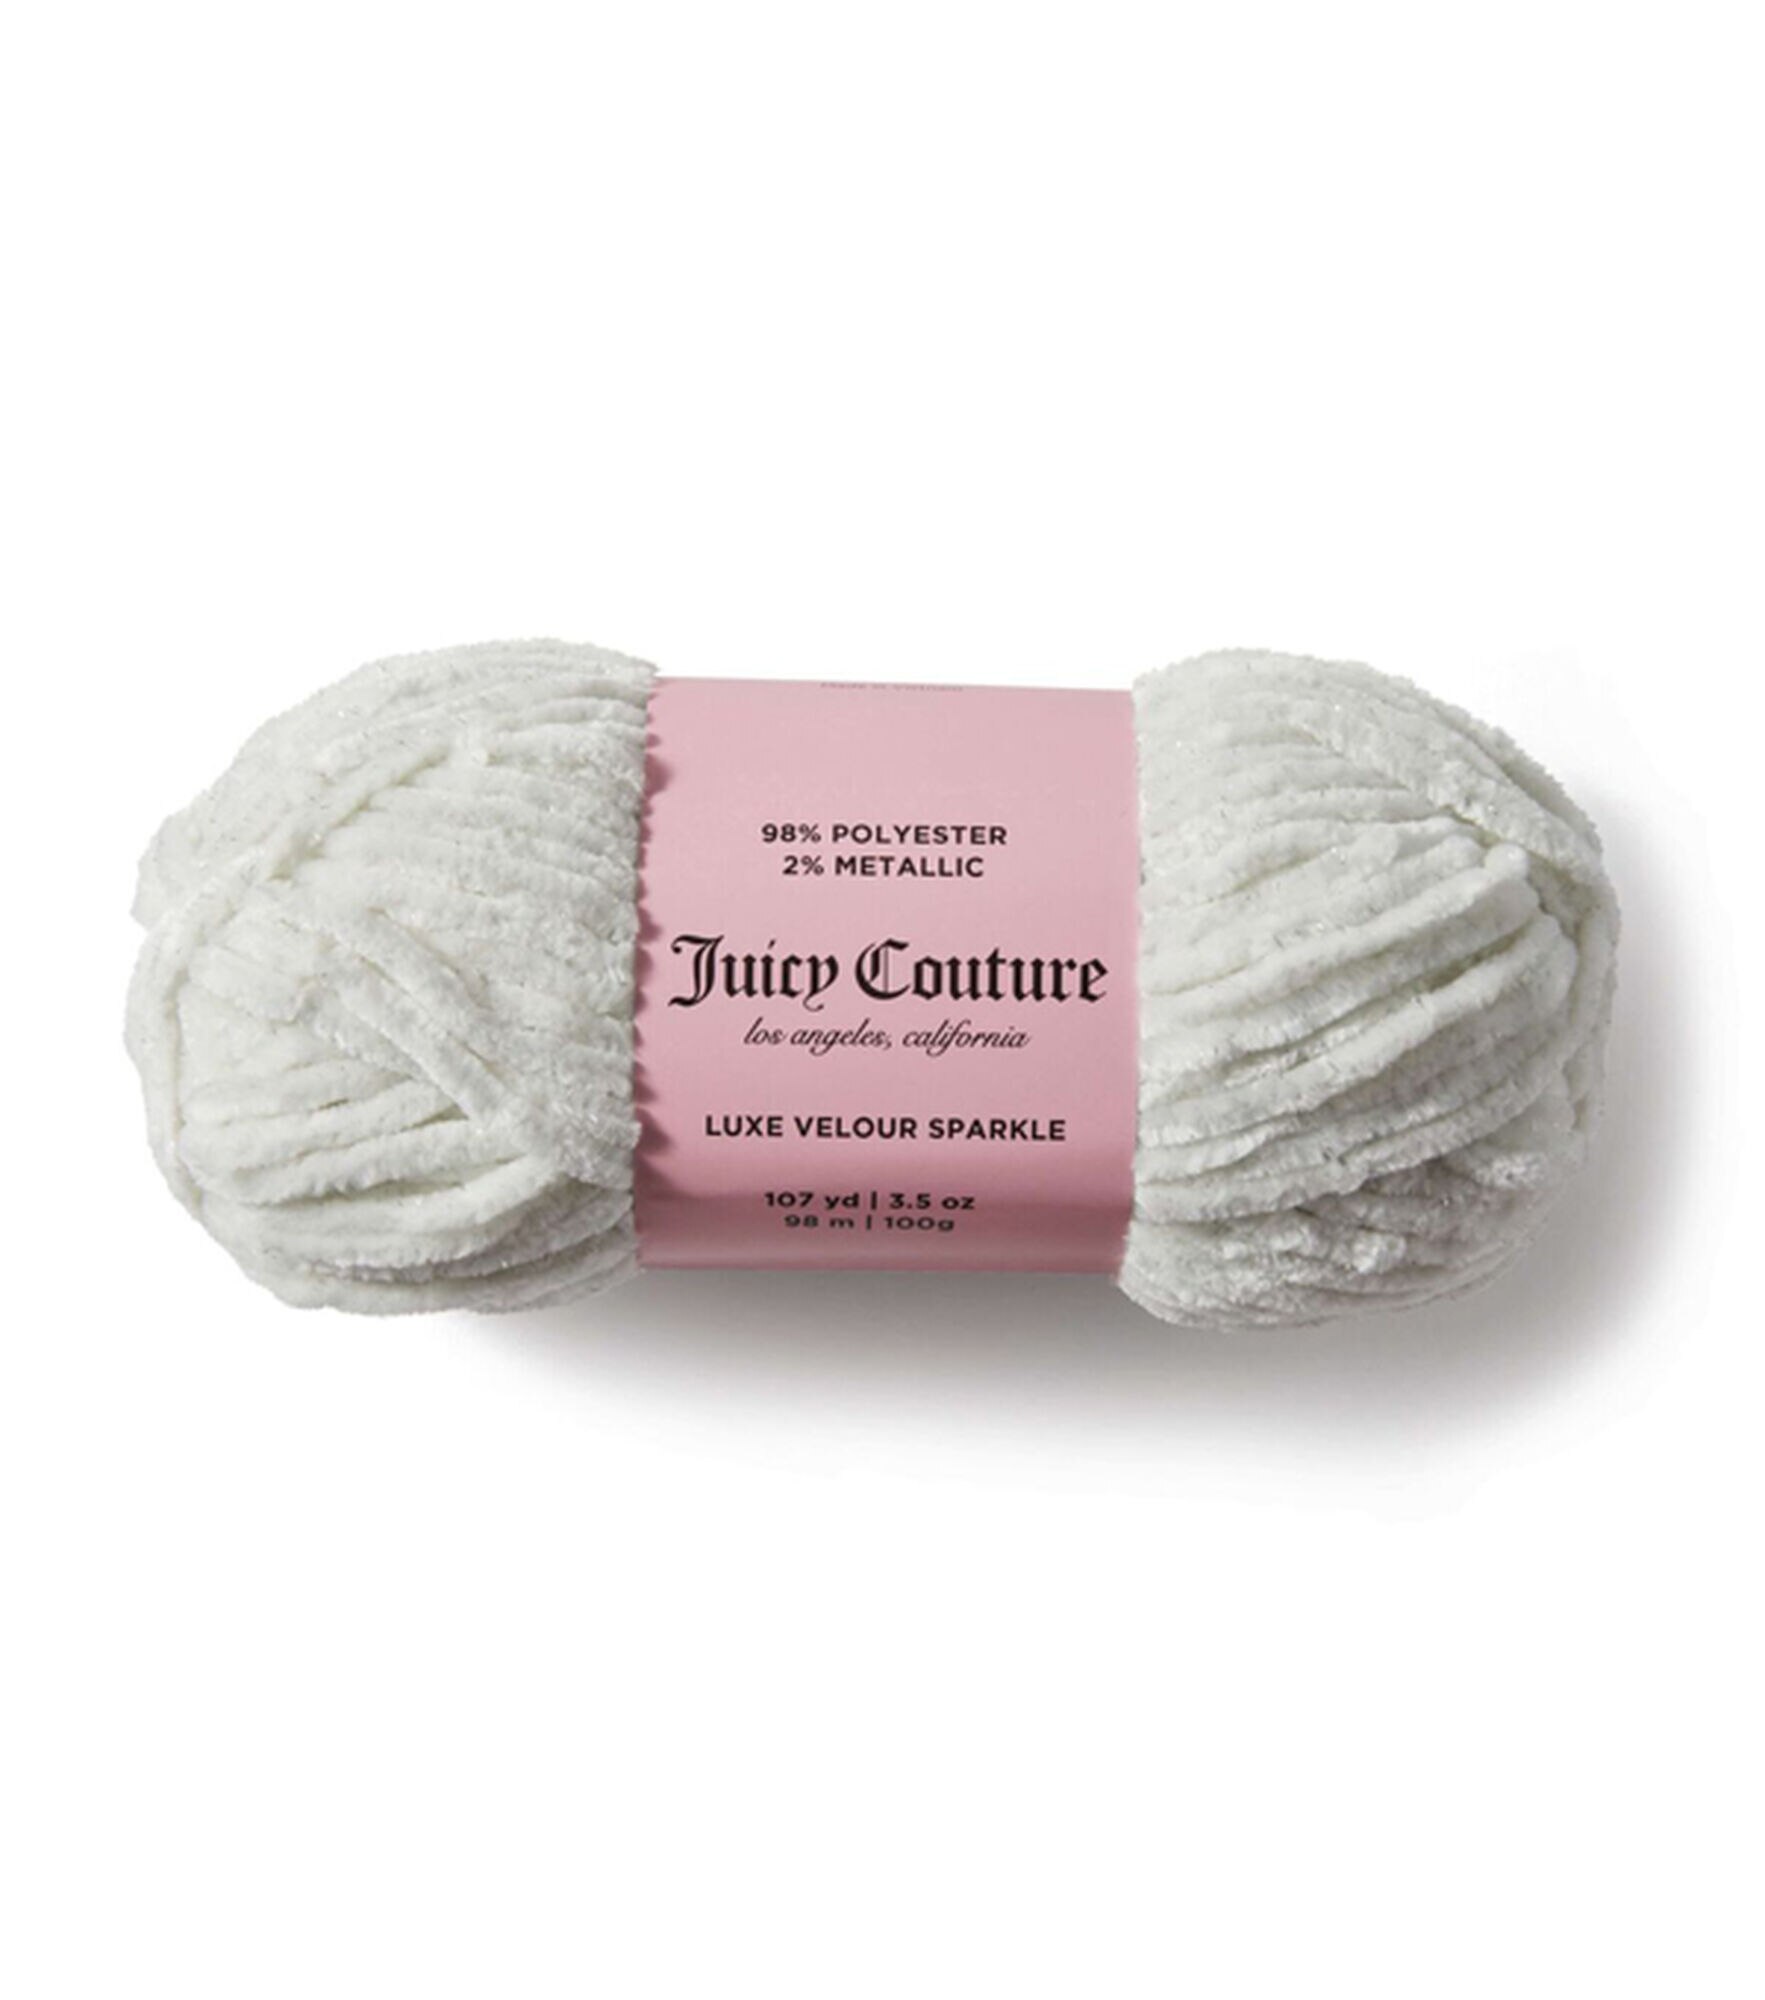 Juicy Couture Luxe Velour Sparkle 107yds Bulky Polyester Yarn, Angel, hi-res